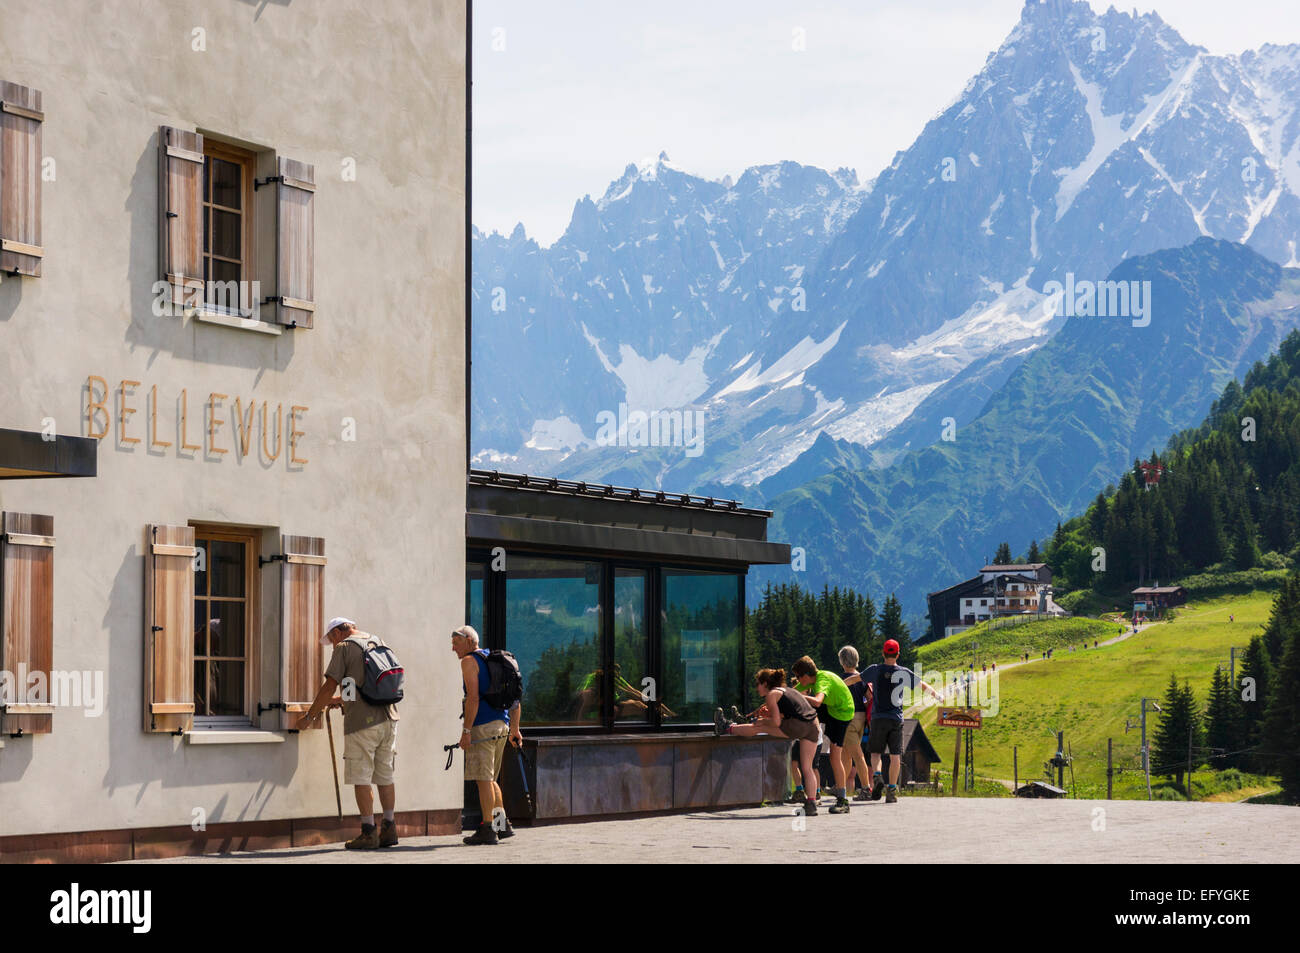 Walkers at the Bellevue Hotel with Aiguille du Midi behind, Chamonix, French Alps, Rhone Alps, France Stock Photo